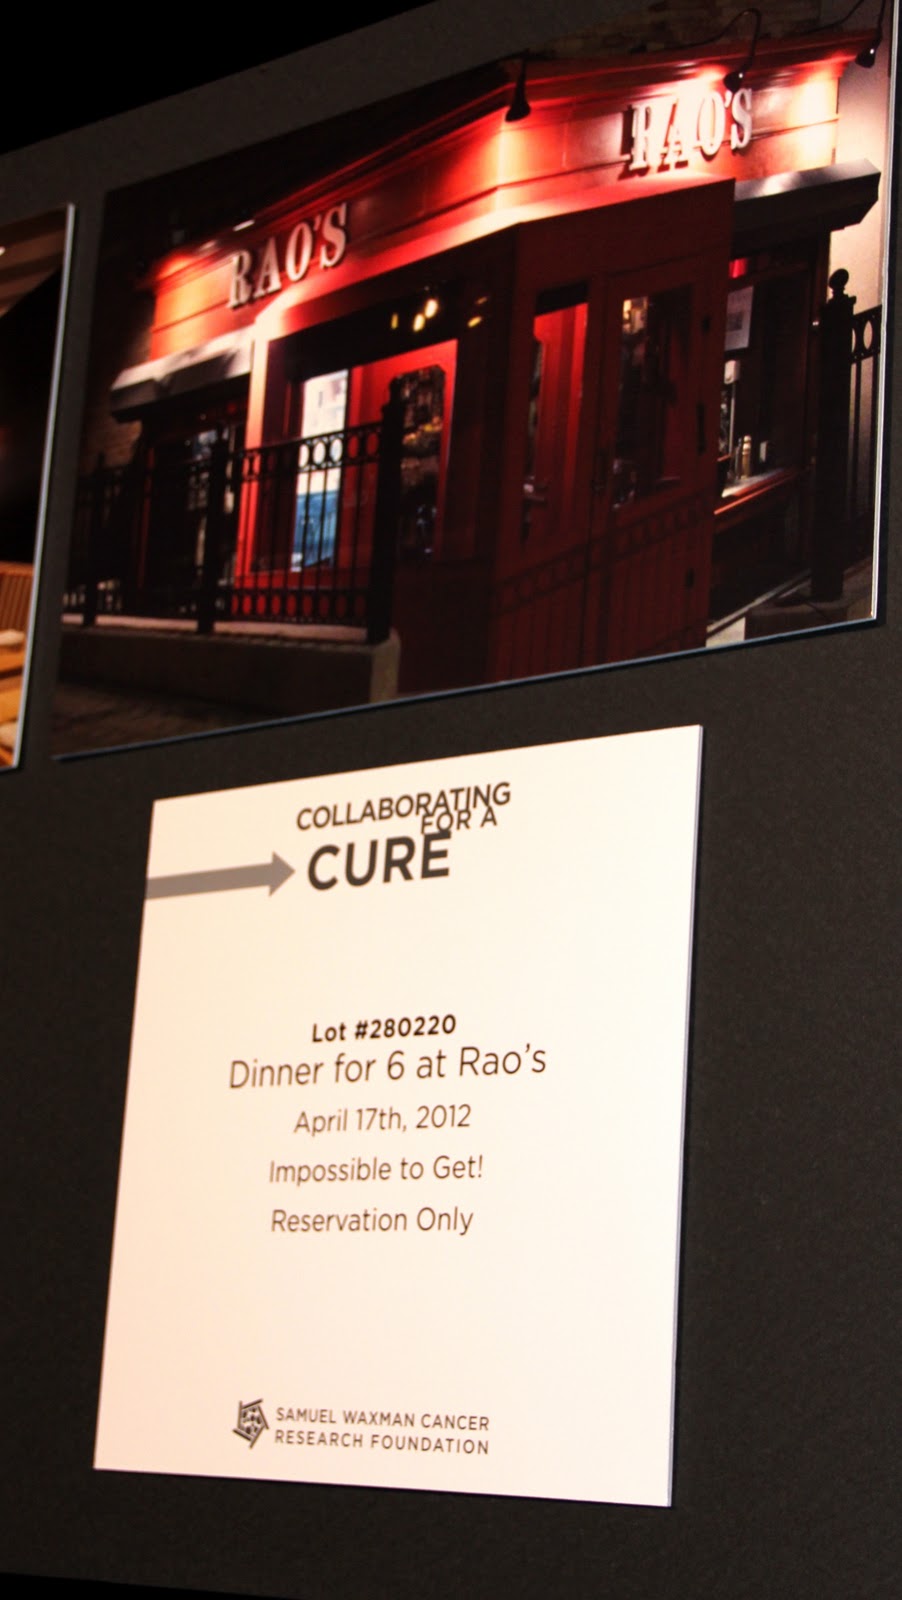 19TH ANNUAL COLLABORATING FOR A CURE DINNER AND AUCTION